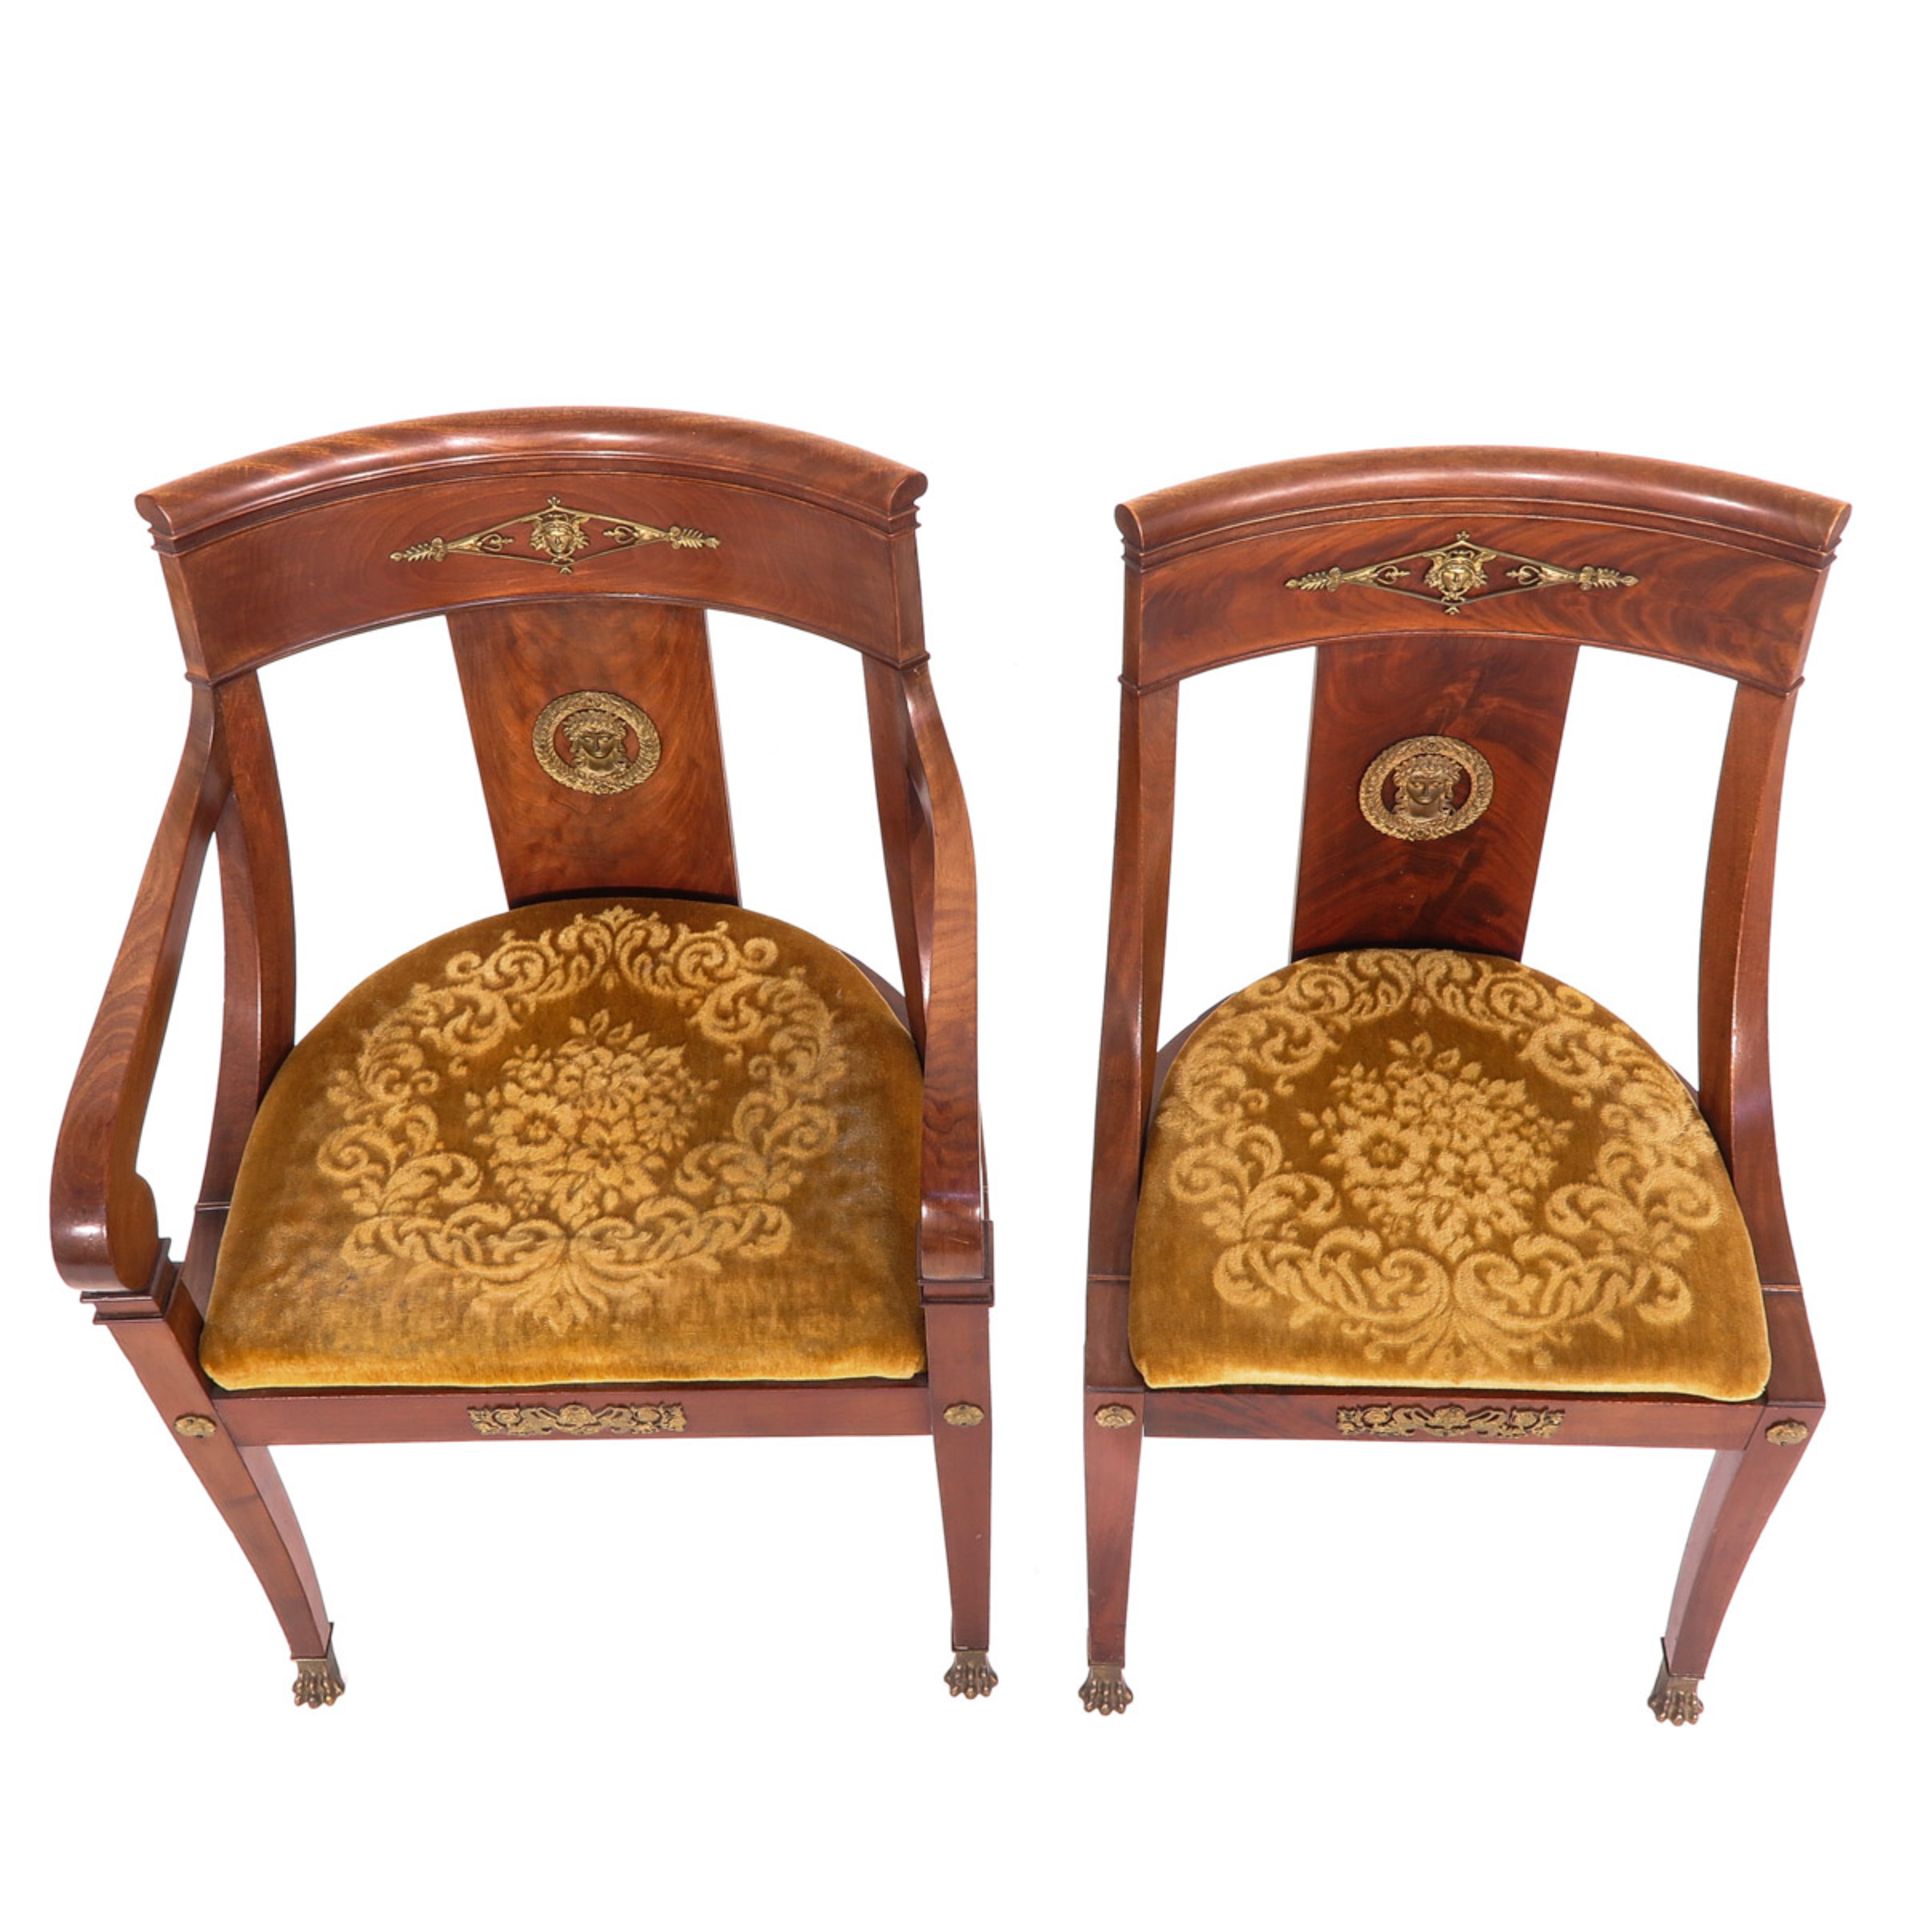 A Pair of Empire Period Chairs - Image 5 of 10